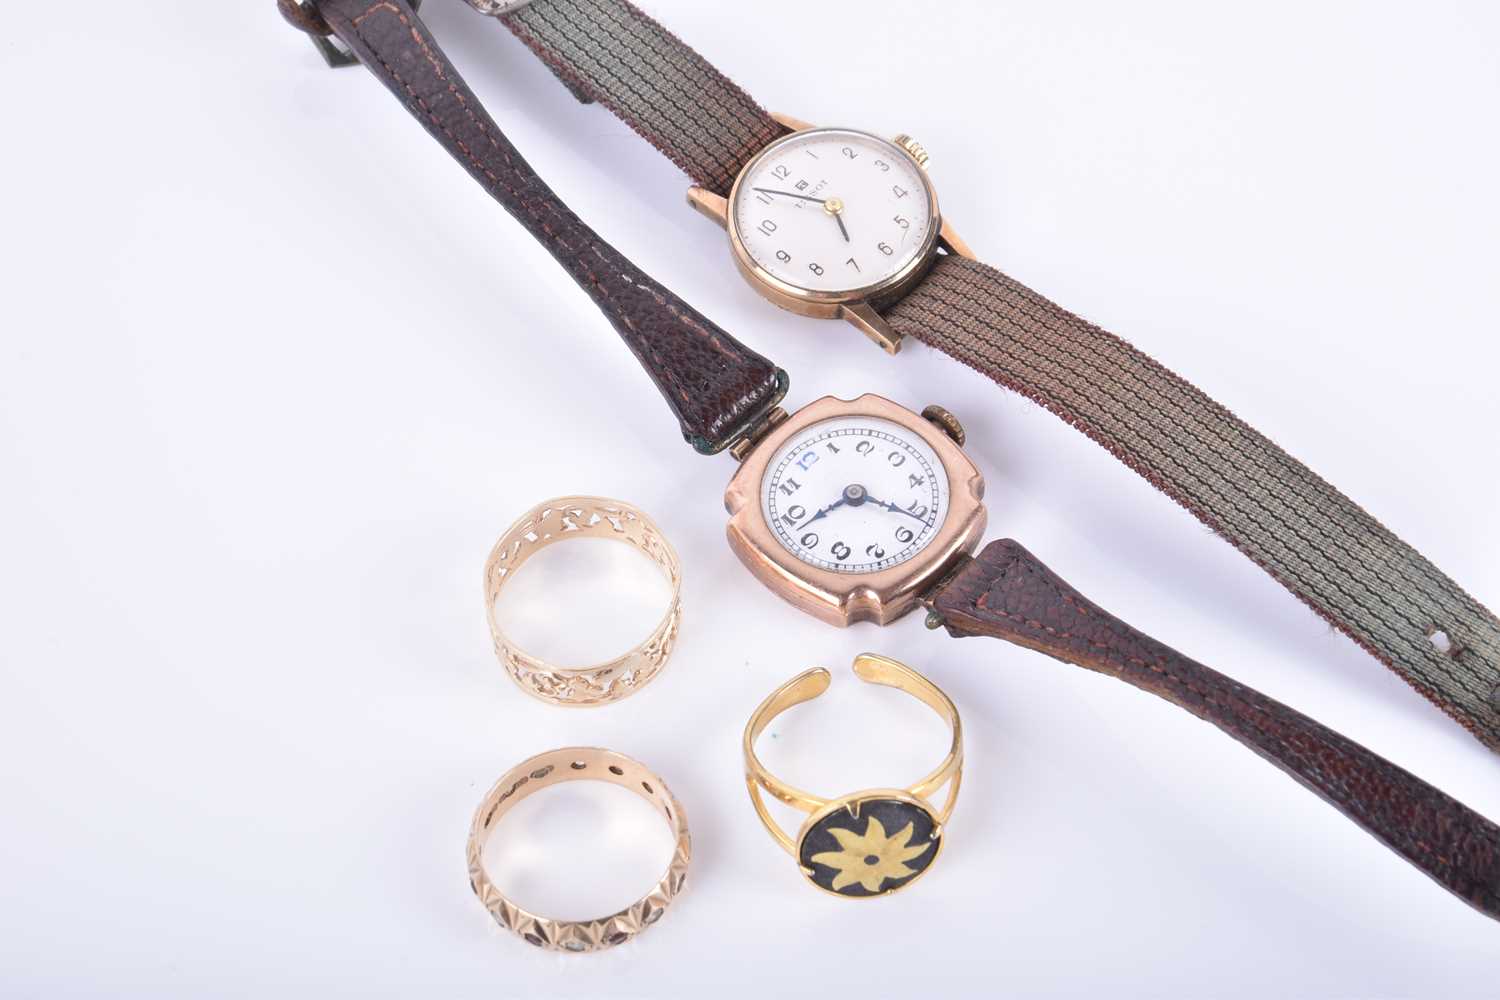 A ladies rose gold cocktail wristwatch on brown leather strap, together with a yellow metal ladies